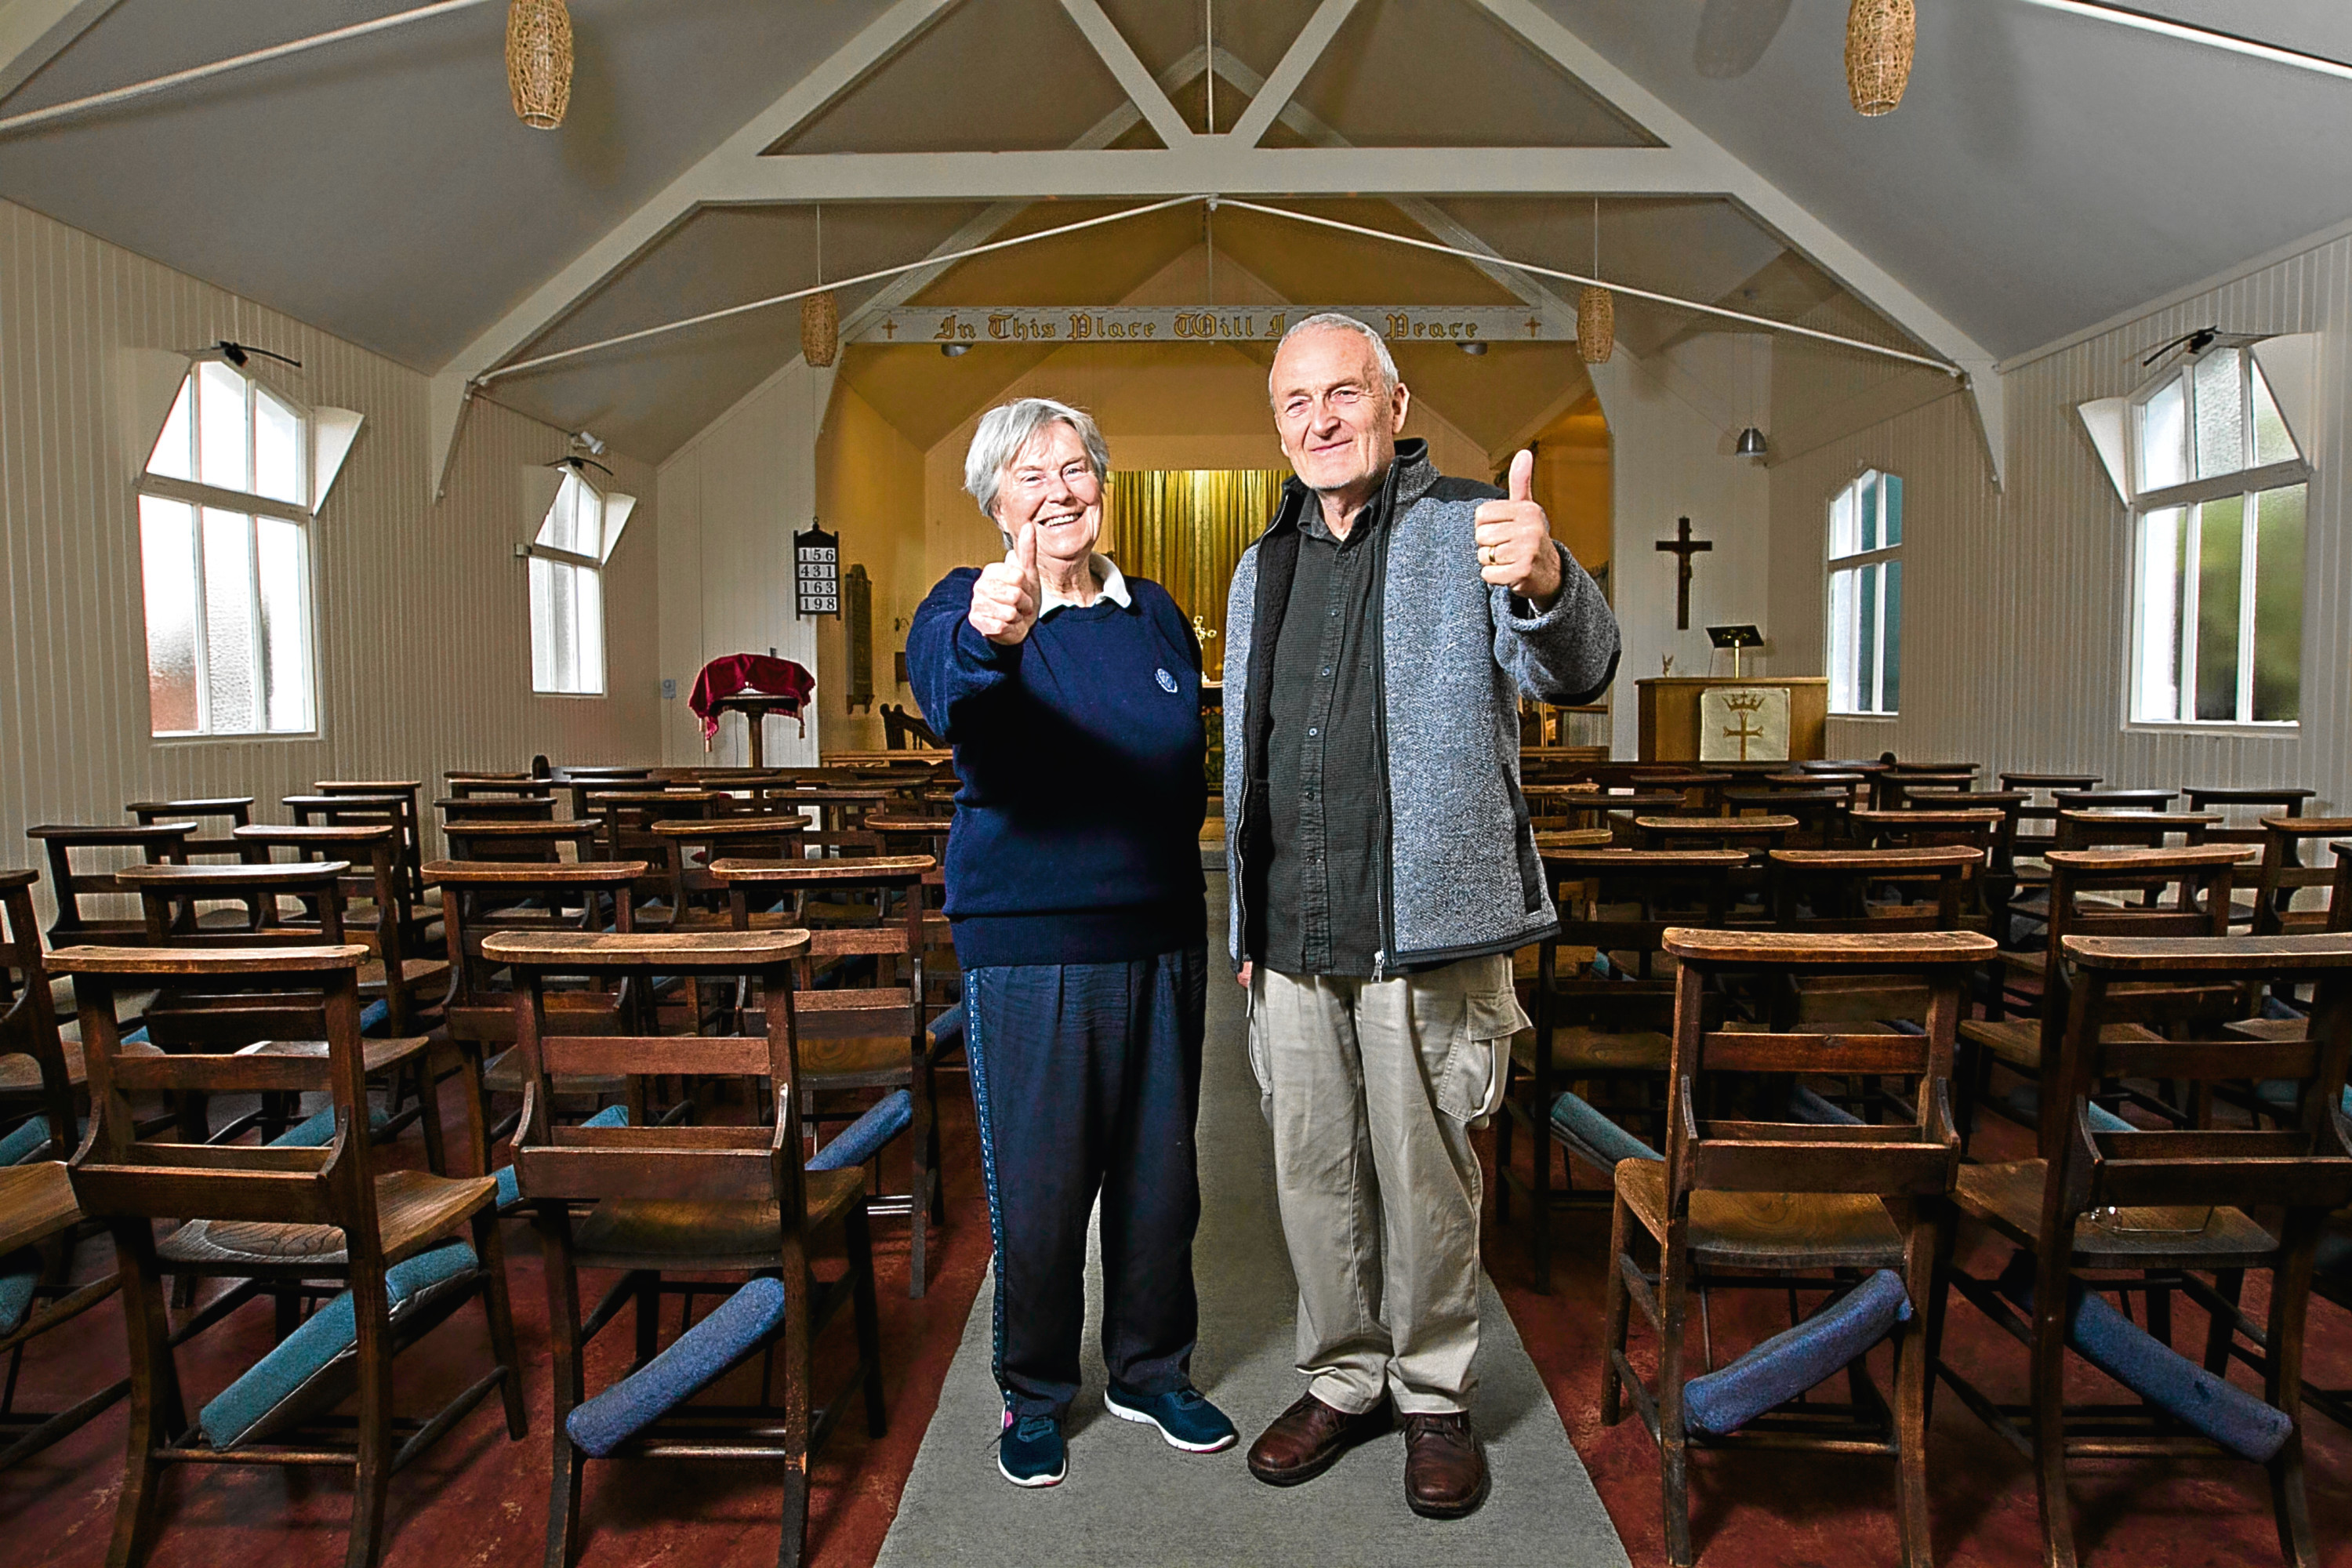 David Stacey, treasurer, and Sheila Barclay, Church warden (Andrew Cawley / DC Thomson)